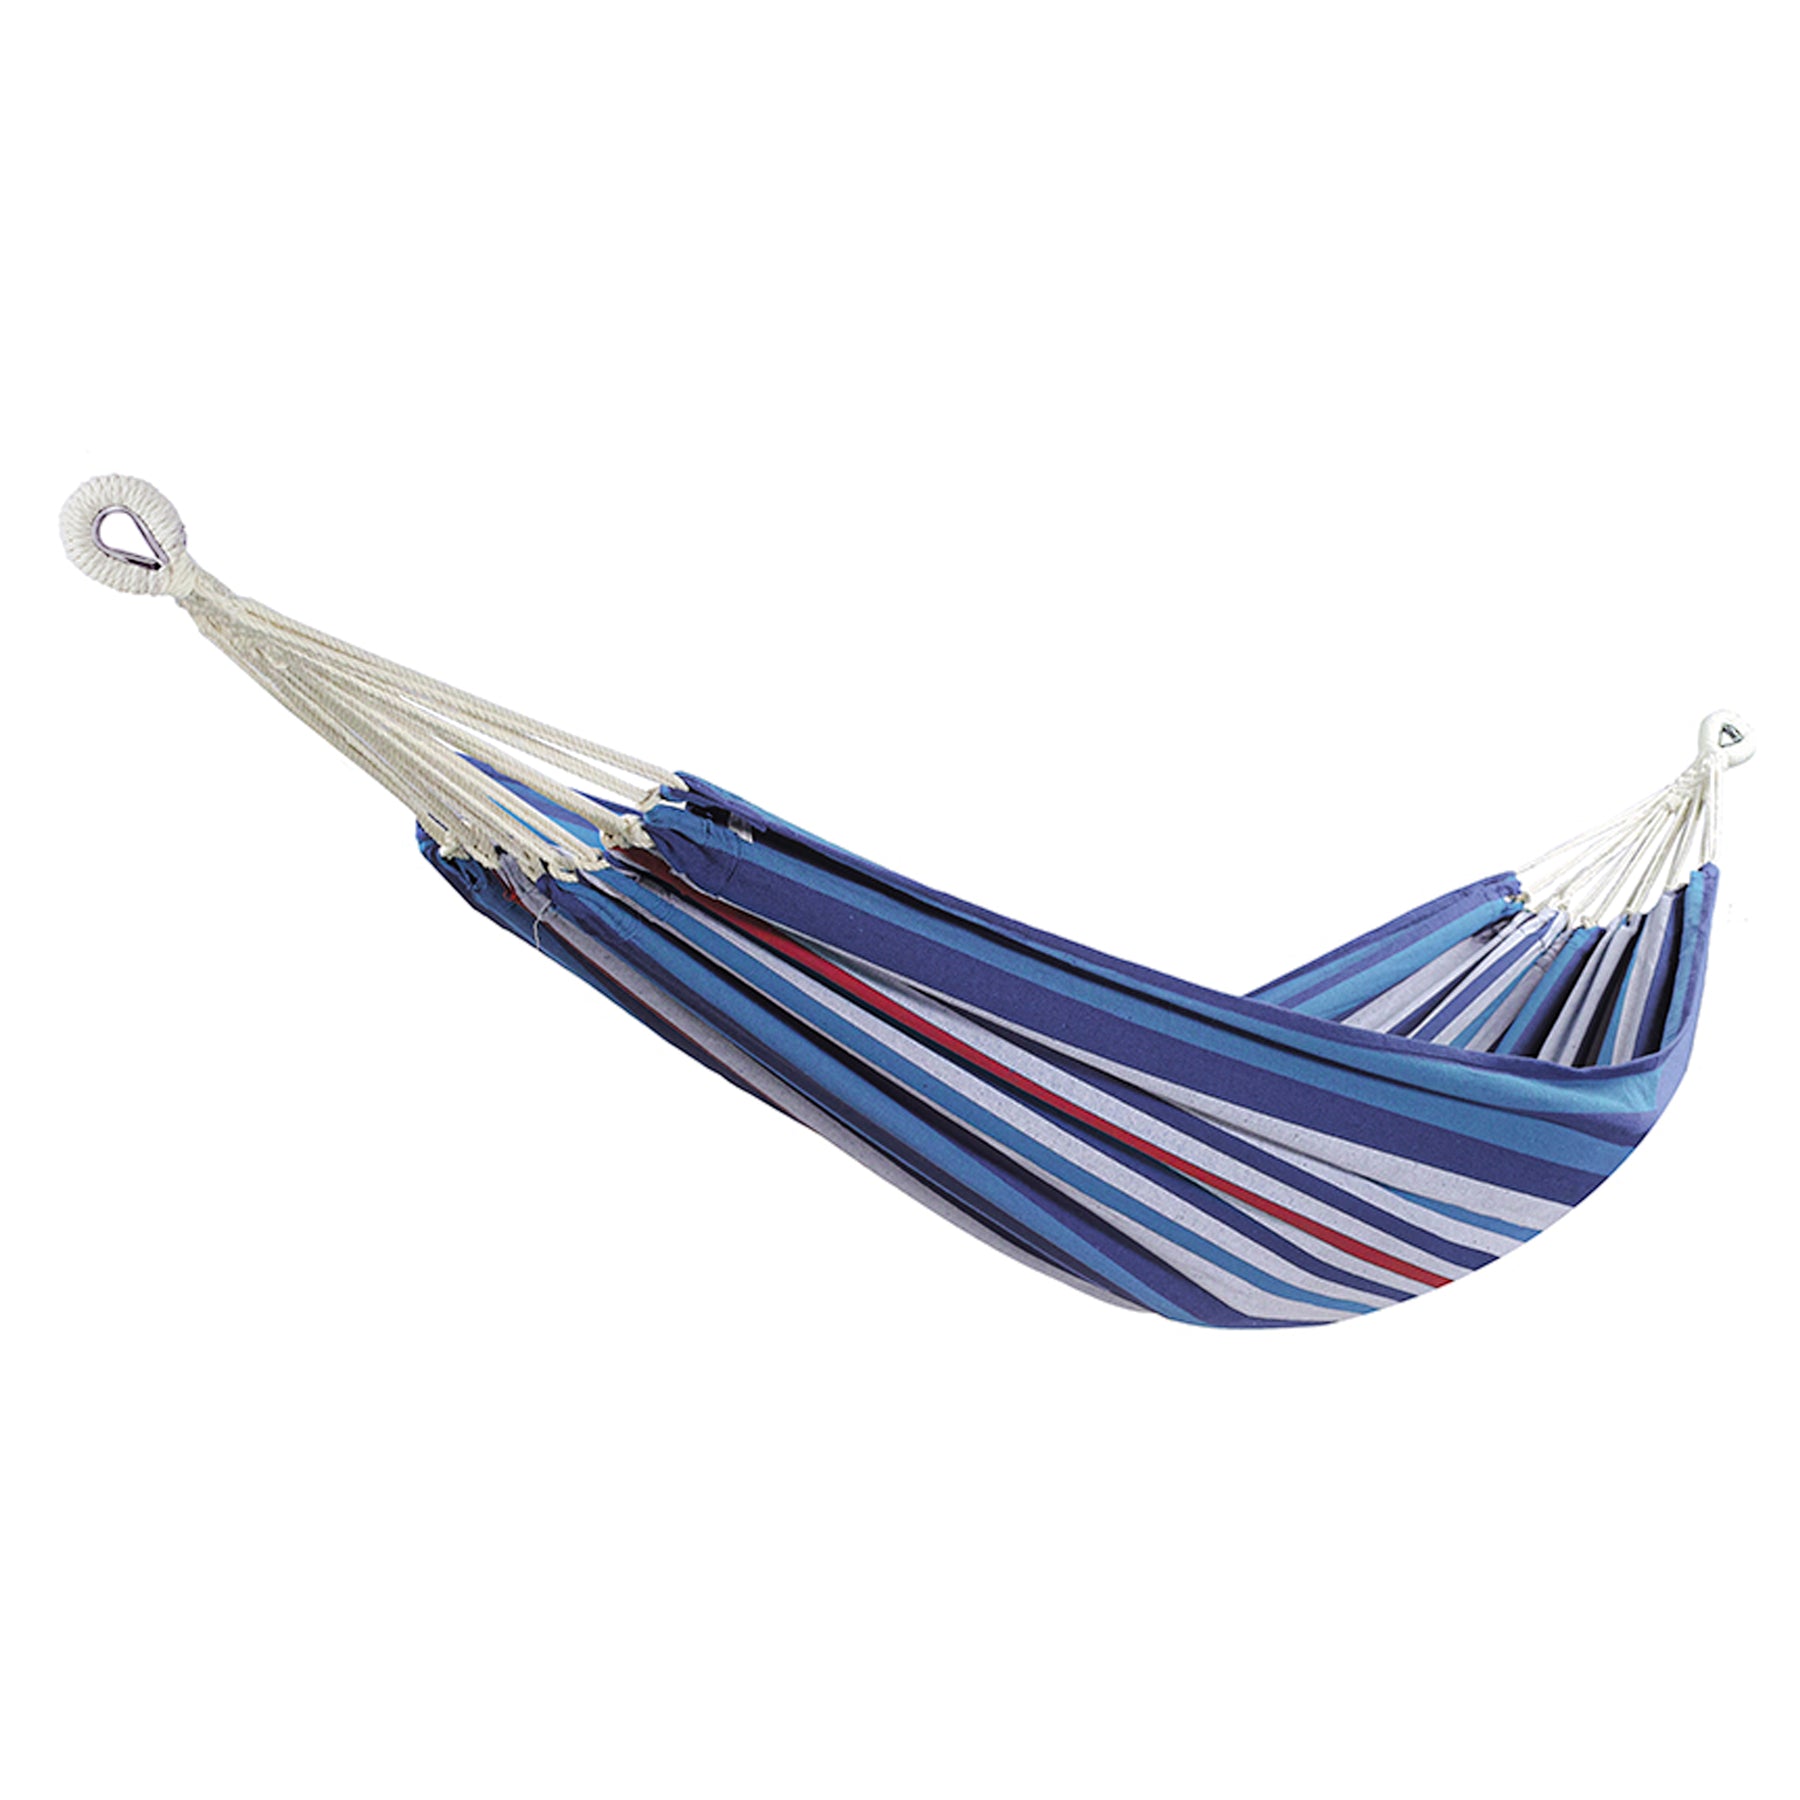 Bliss Hammocks 40-inch Wide Hammock in a Bag w/ Hand-woven Rope loops. It is mostly shades of blue with some white and red stripes.